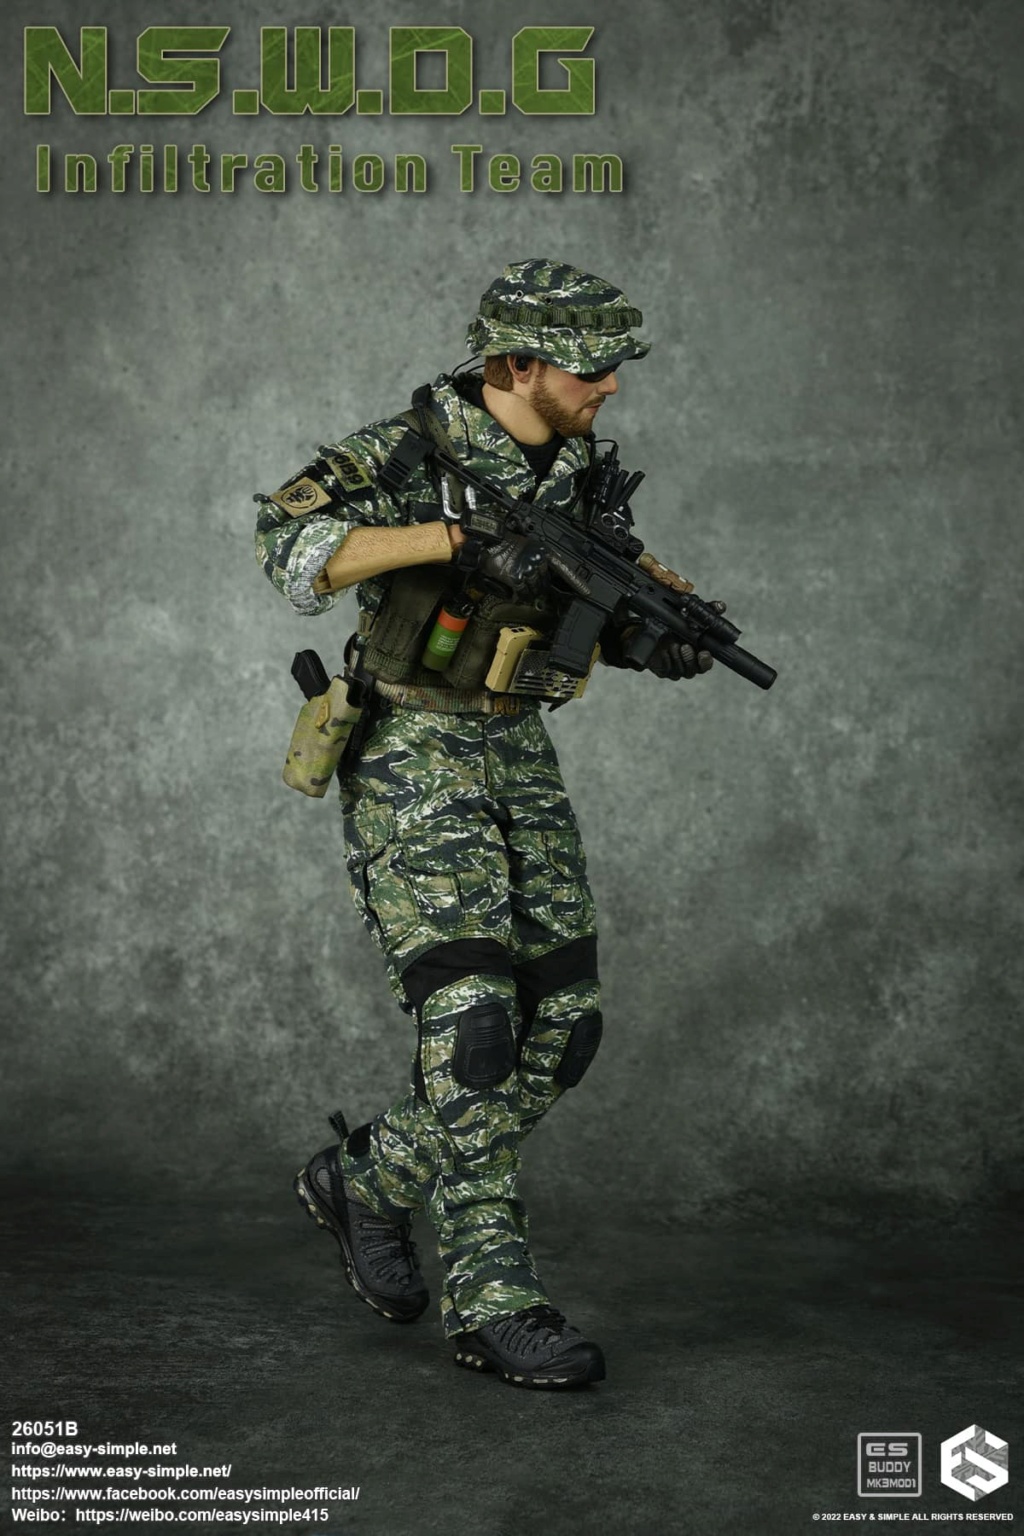 NEW PRODUCT: EASY AND SIMPLE 1/6 SCALE FIGURE: N.S.W.D.G INFILTRATION TEAM - (2 Versions) 9554